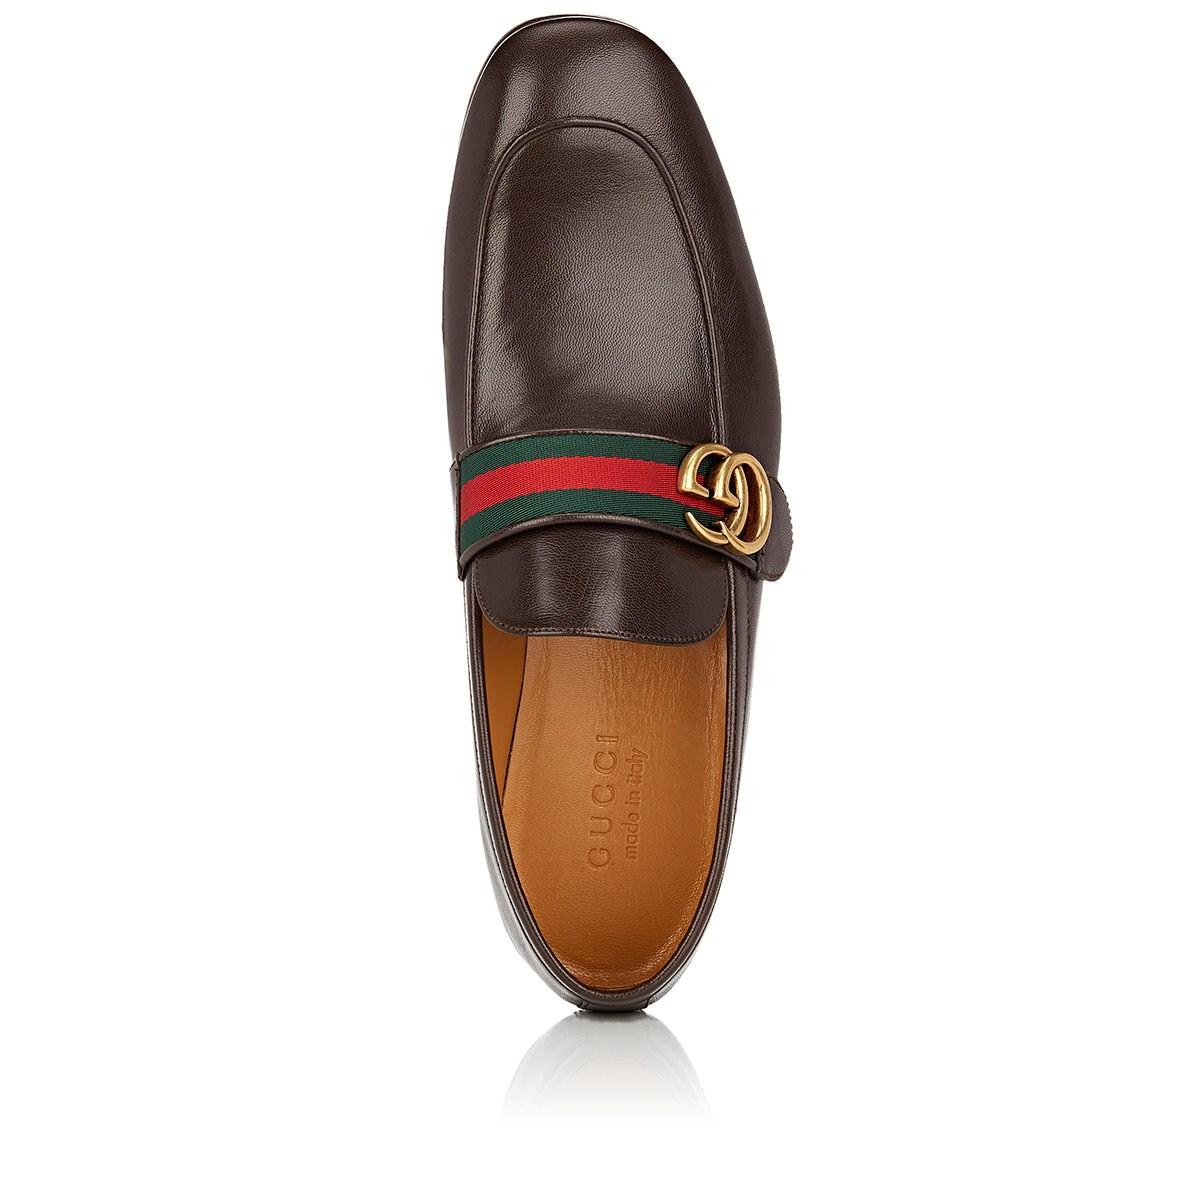 Gucci Donnie Leather Loafers in Dark Brown,Brown (Brown) for Men - Lyst